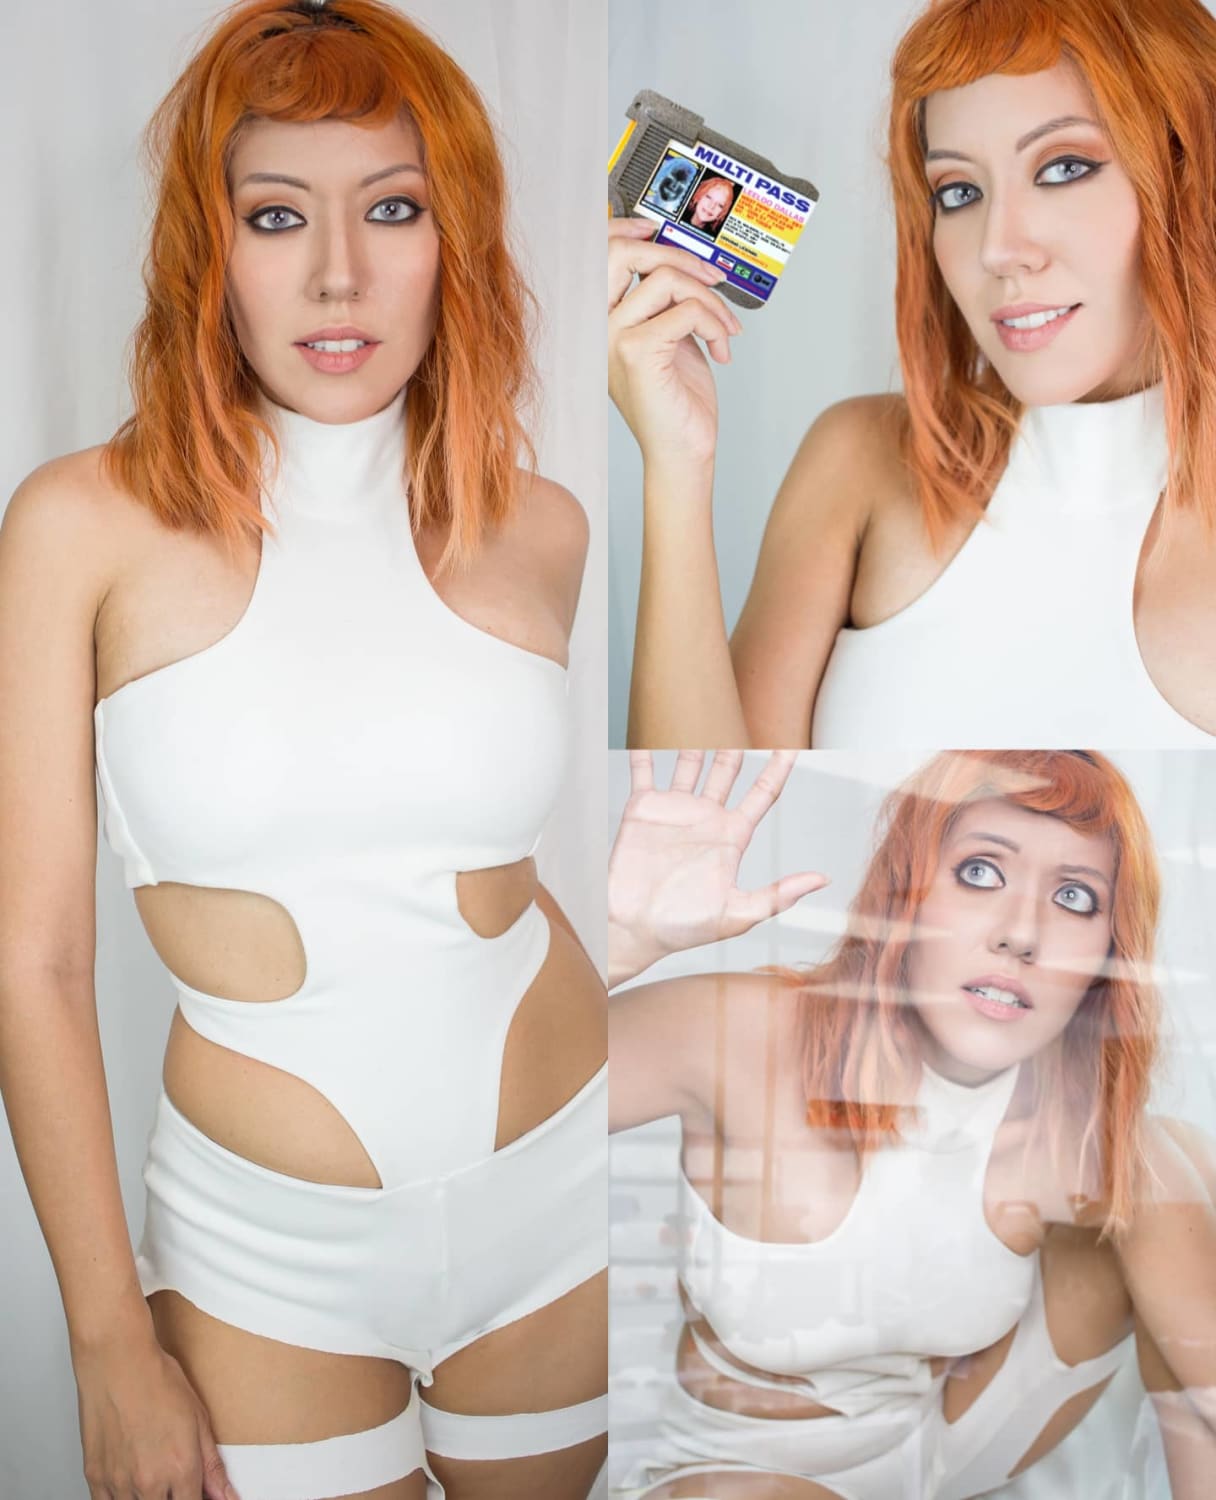 [Self] Leeloo from the Fifth element by Angel Kaoru